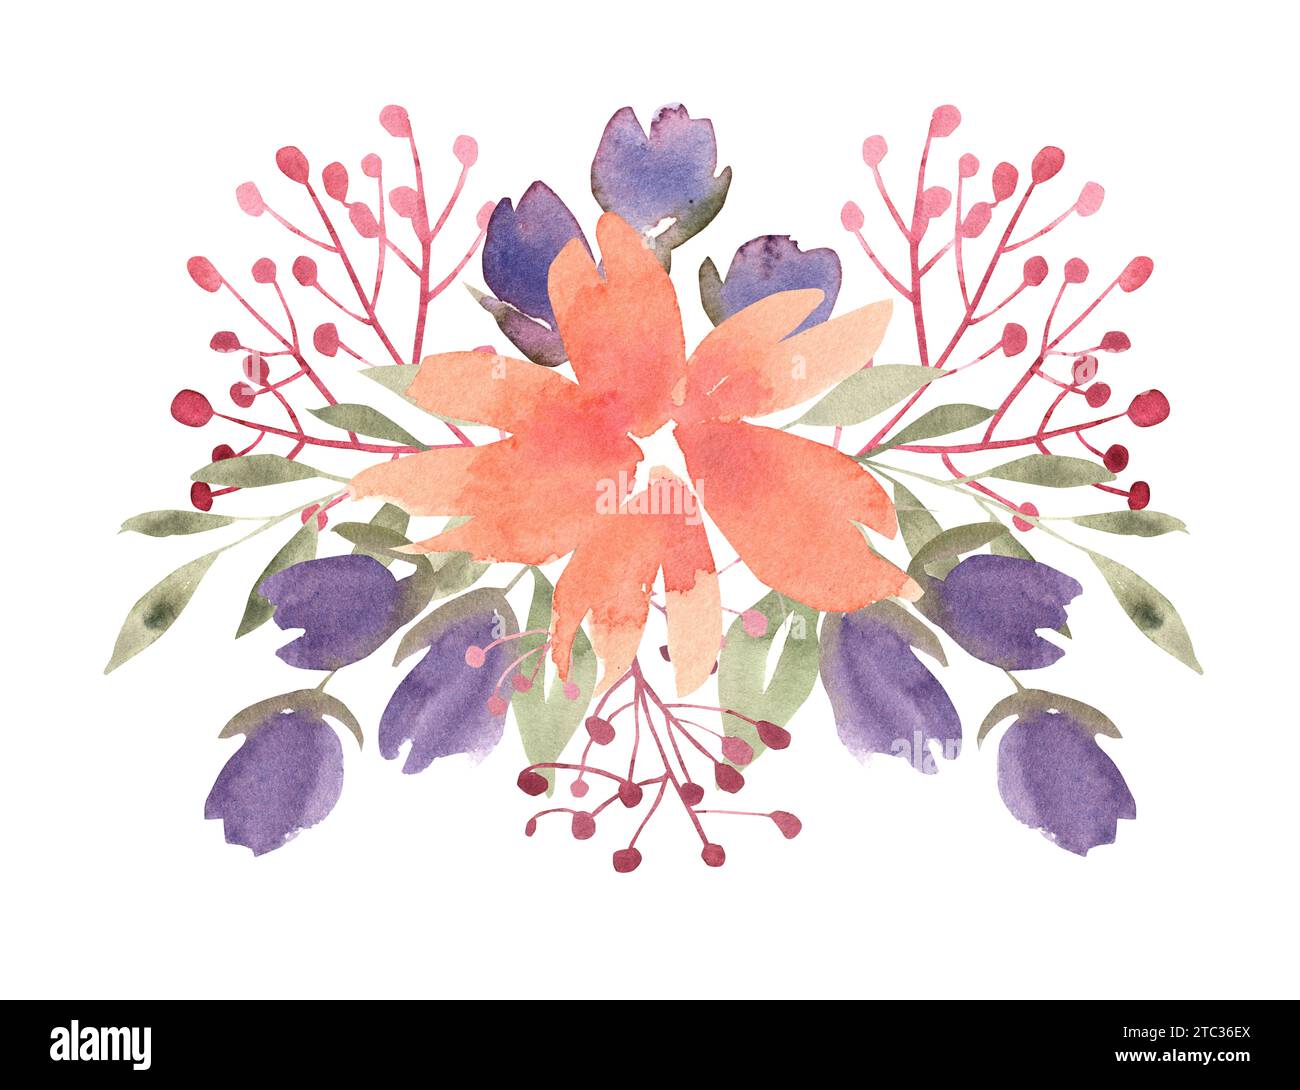 Watercolor floral bouquet with purple and orange flowers. Isolated hand painted design. Botanical illustration for wedding design, greeting cards Stock Photo